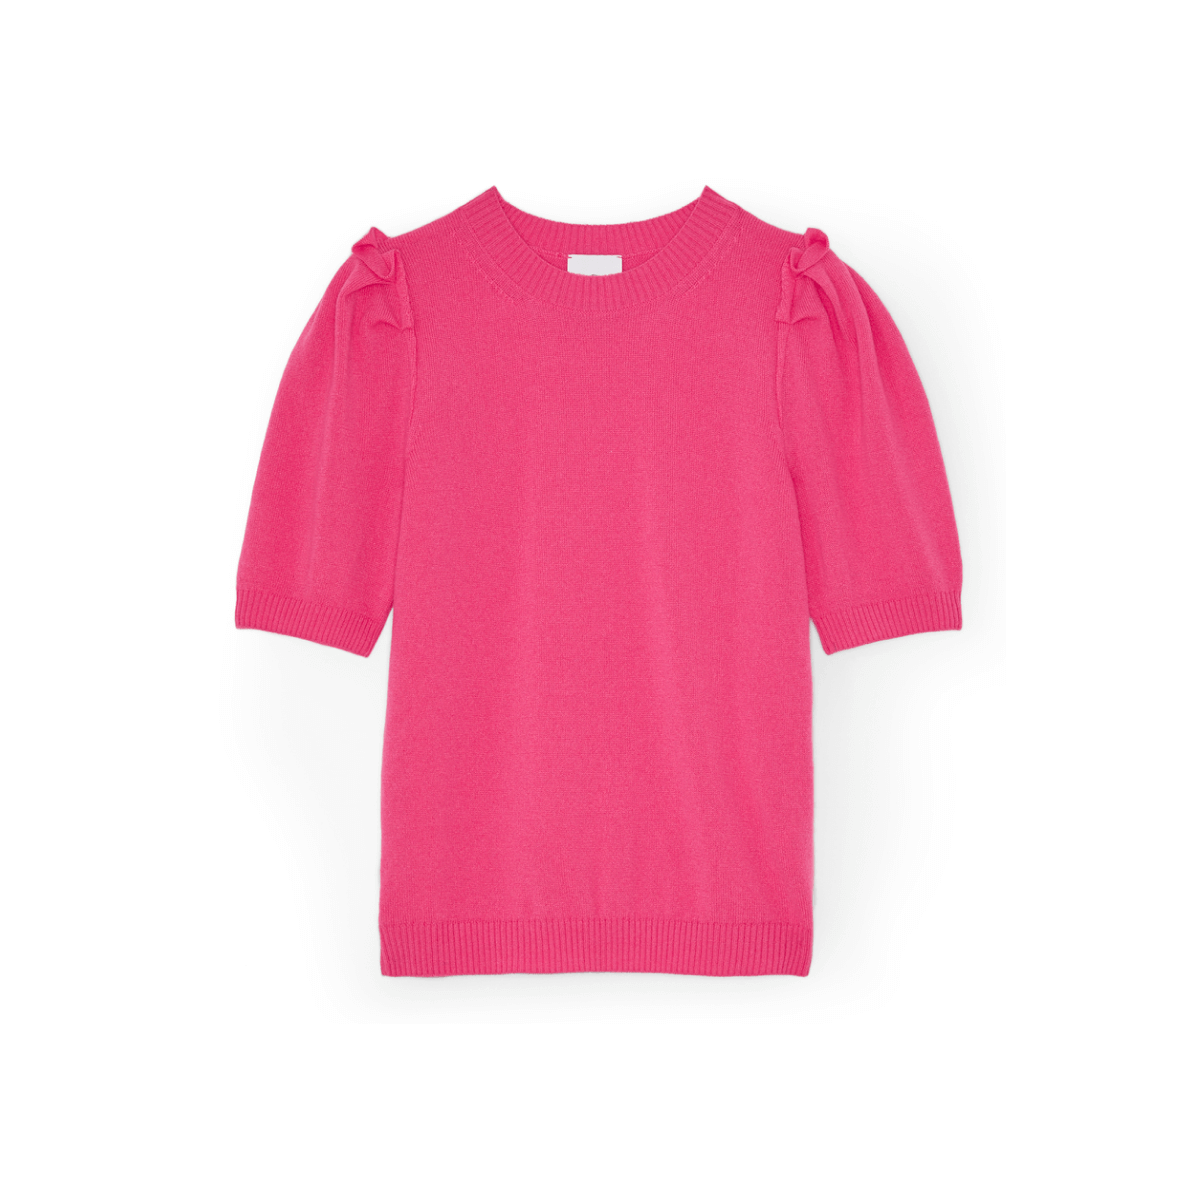 G. Label SHELBY SHORT-SLEEVE PUFF SWEATER